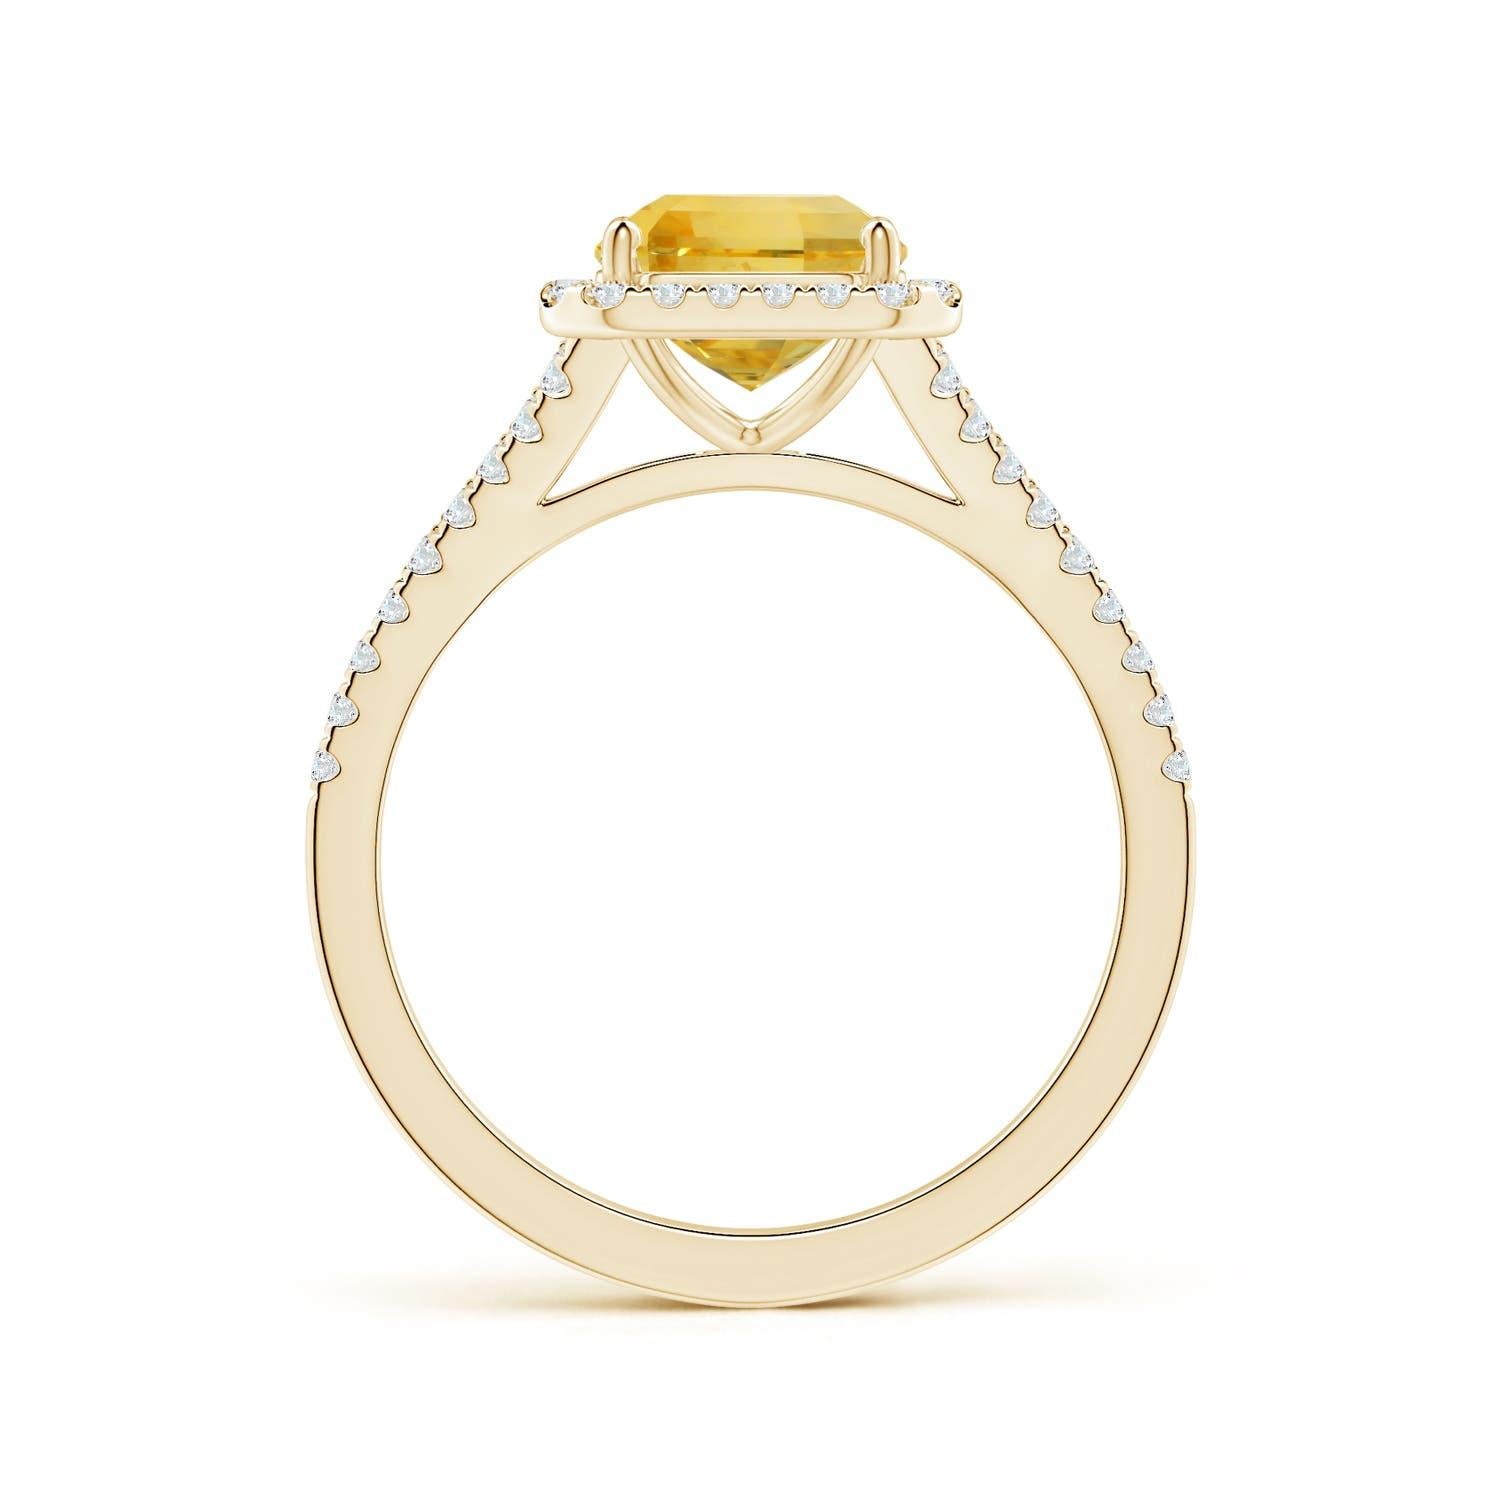 For Sale:  Angara Gia Certified Emerald-Cut Yellow Sapphire Halo Ring in Yellow Gold 2